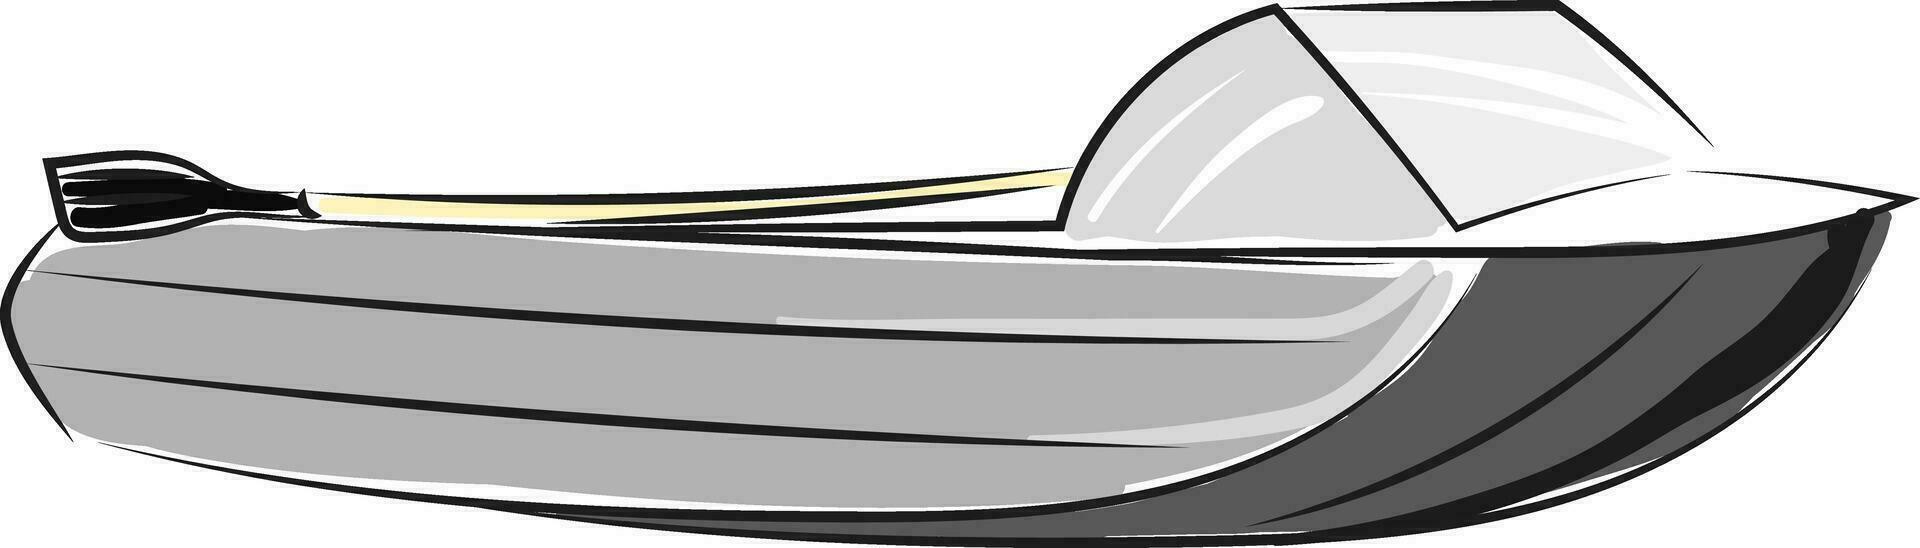 Gray speed boat, vector or color illustration.